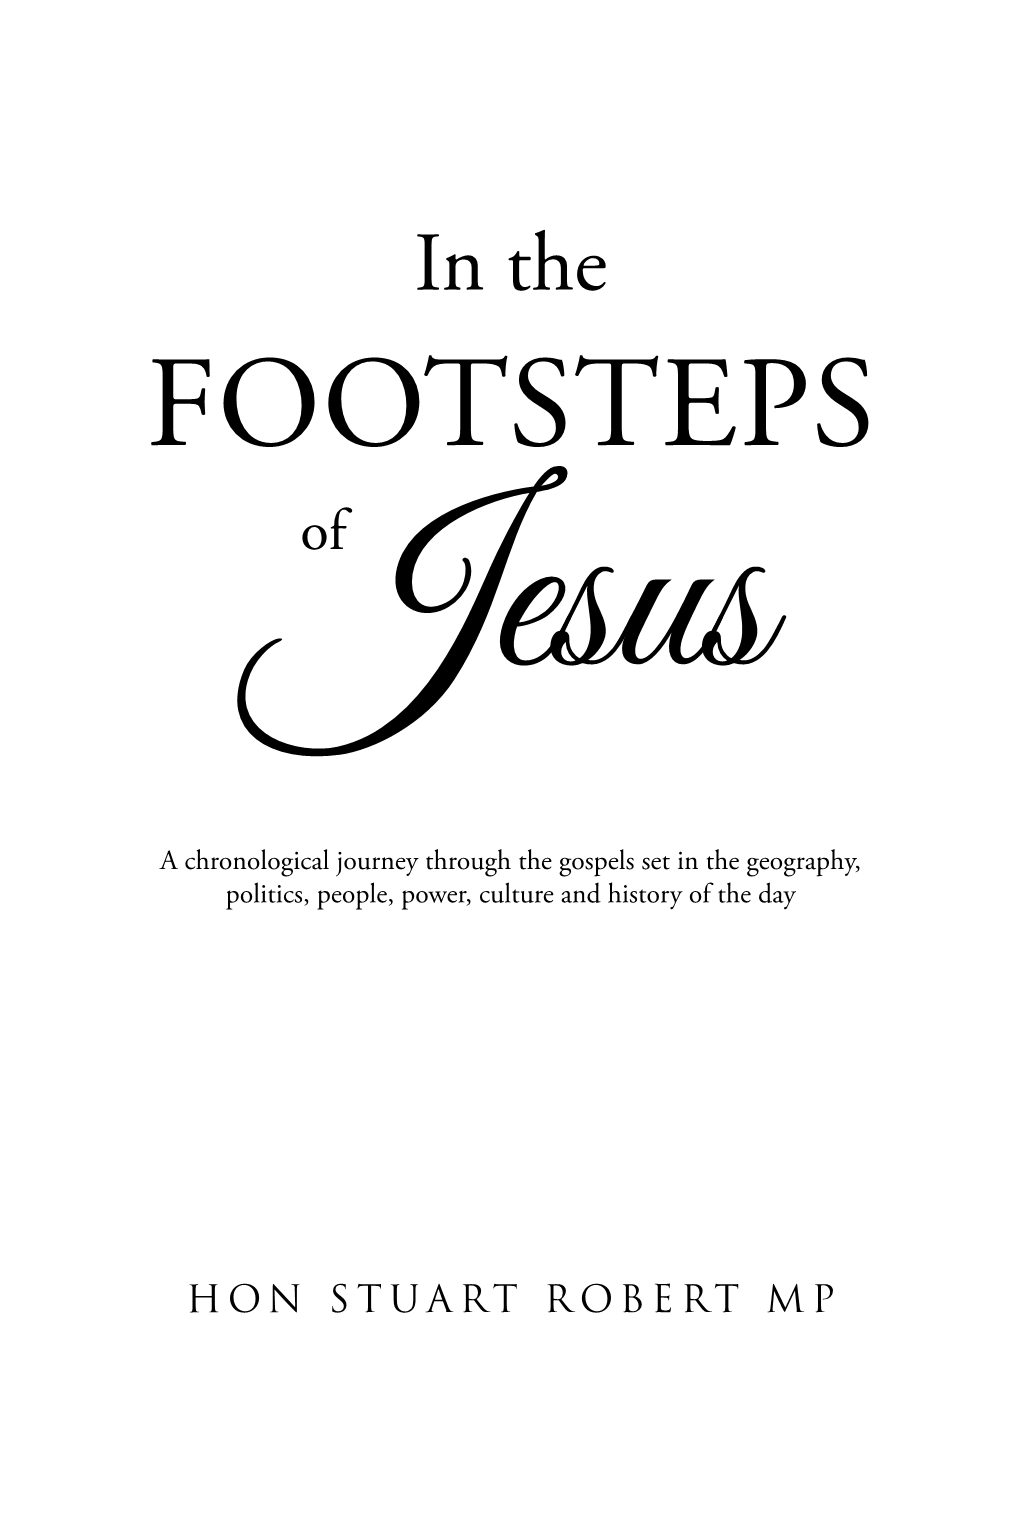 9780975756713 Txt in the Footsteps of Jesus.Indd